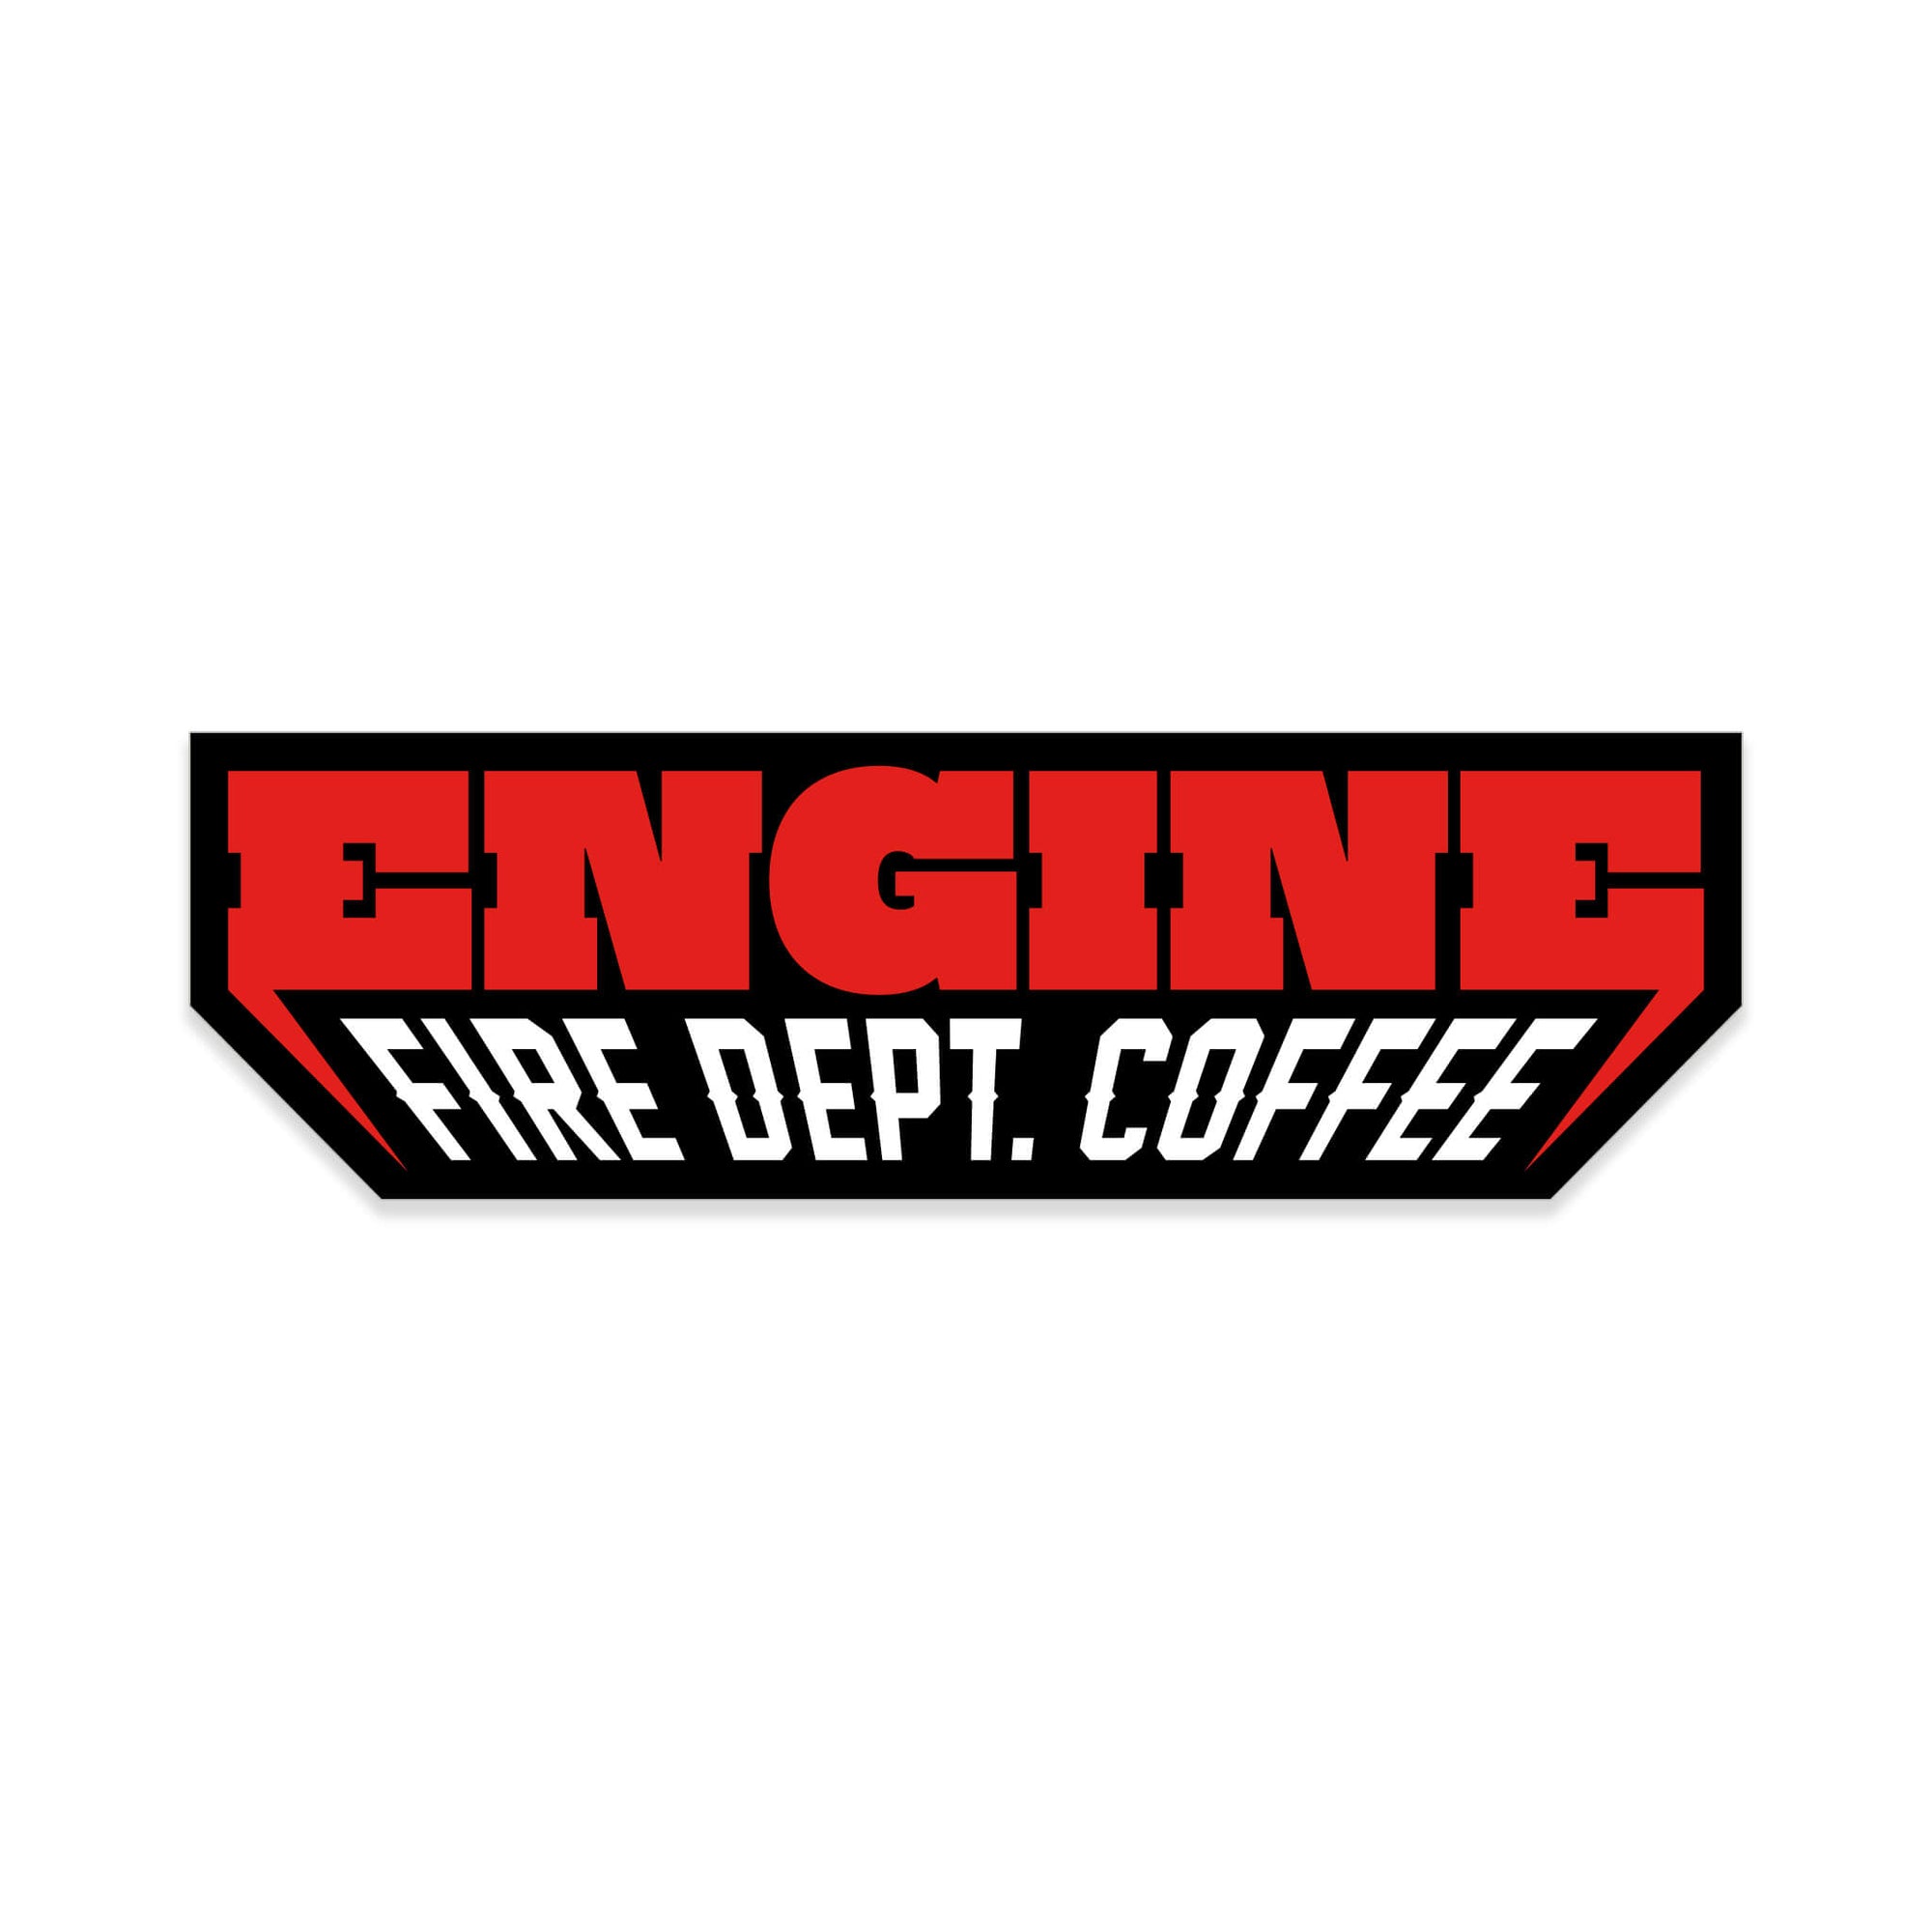 Sticker with "Engine" in bold, red lettering and "Fire Dept. Coffee" below in white.